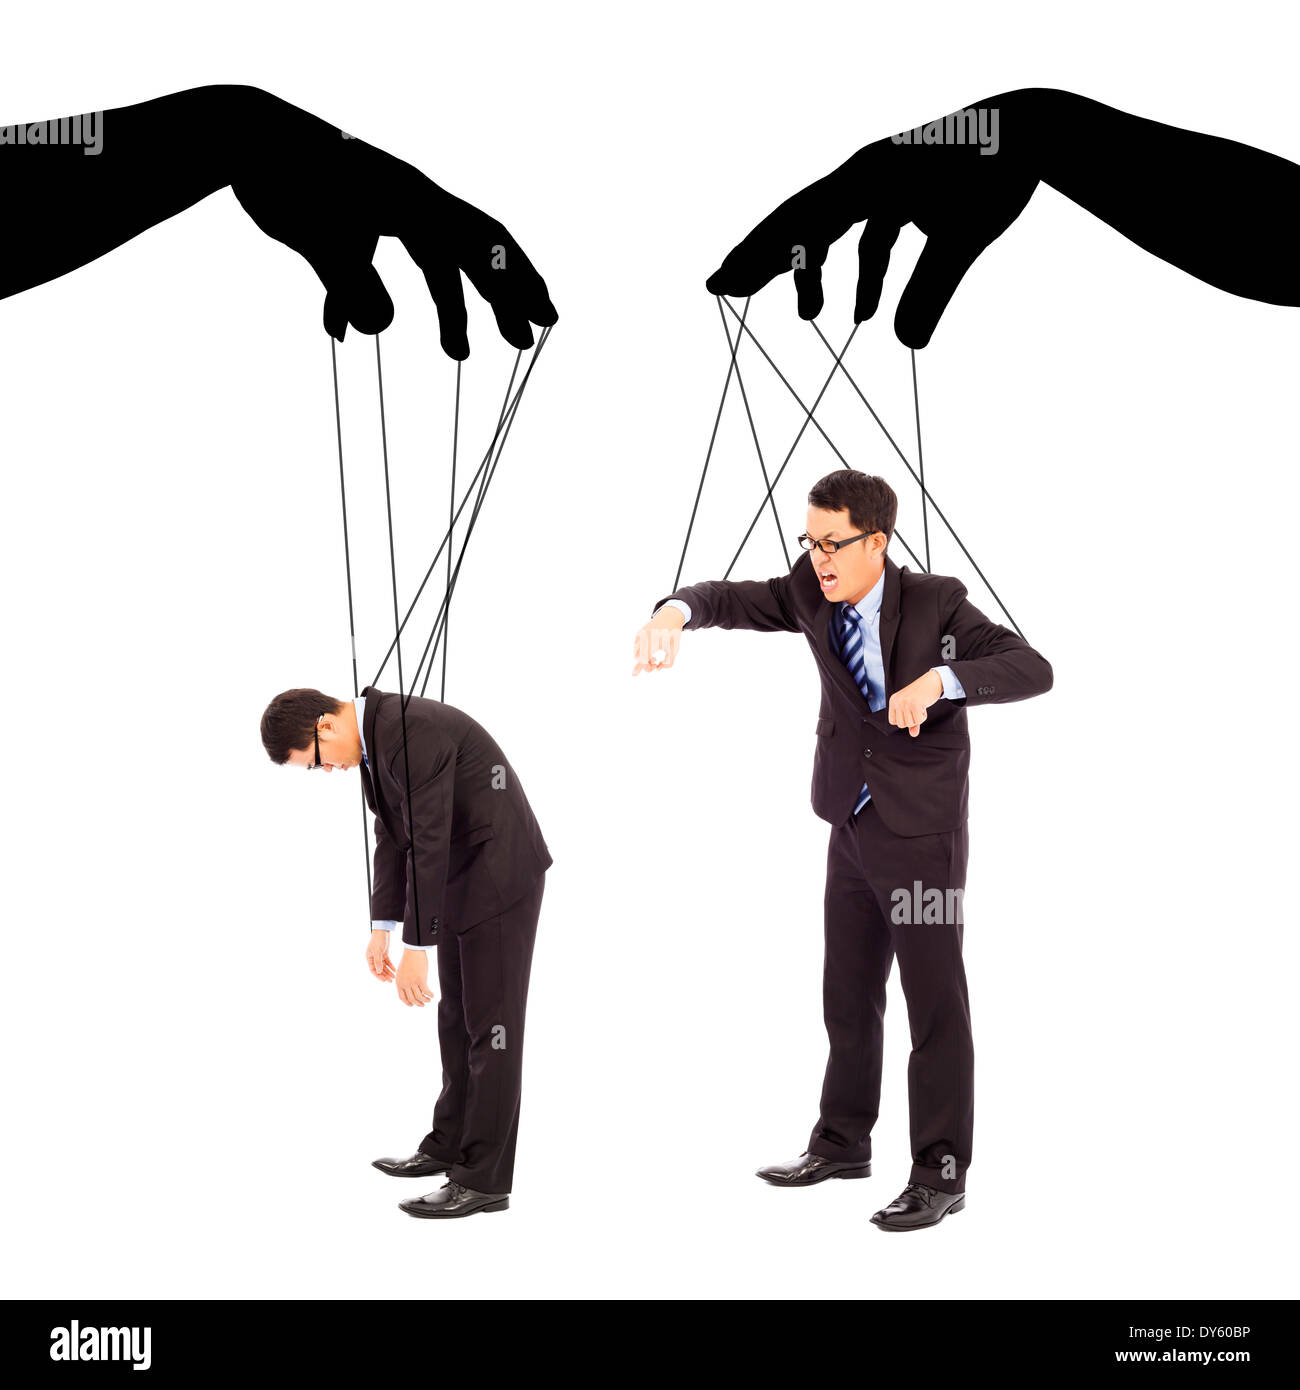 black hands shadow control two businessman actions Stock Photo